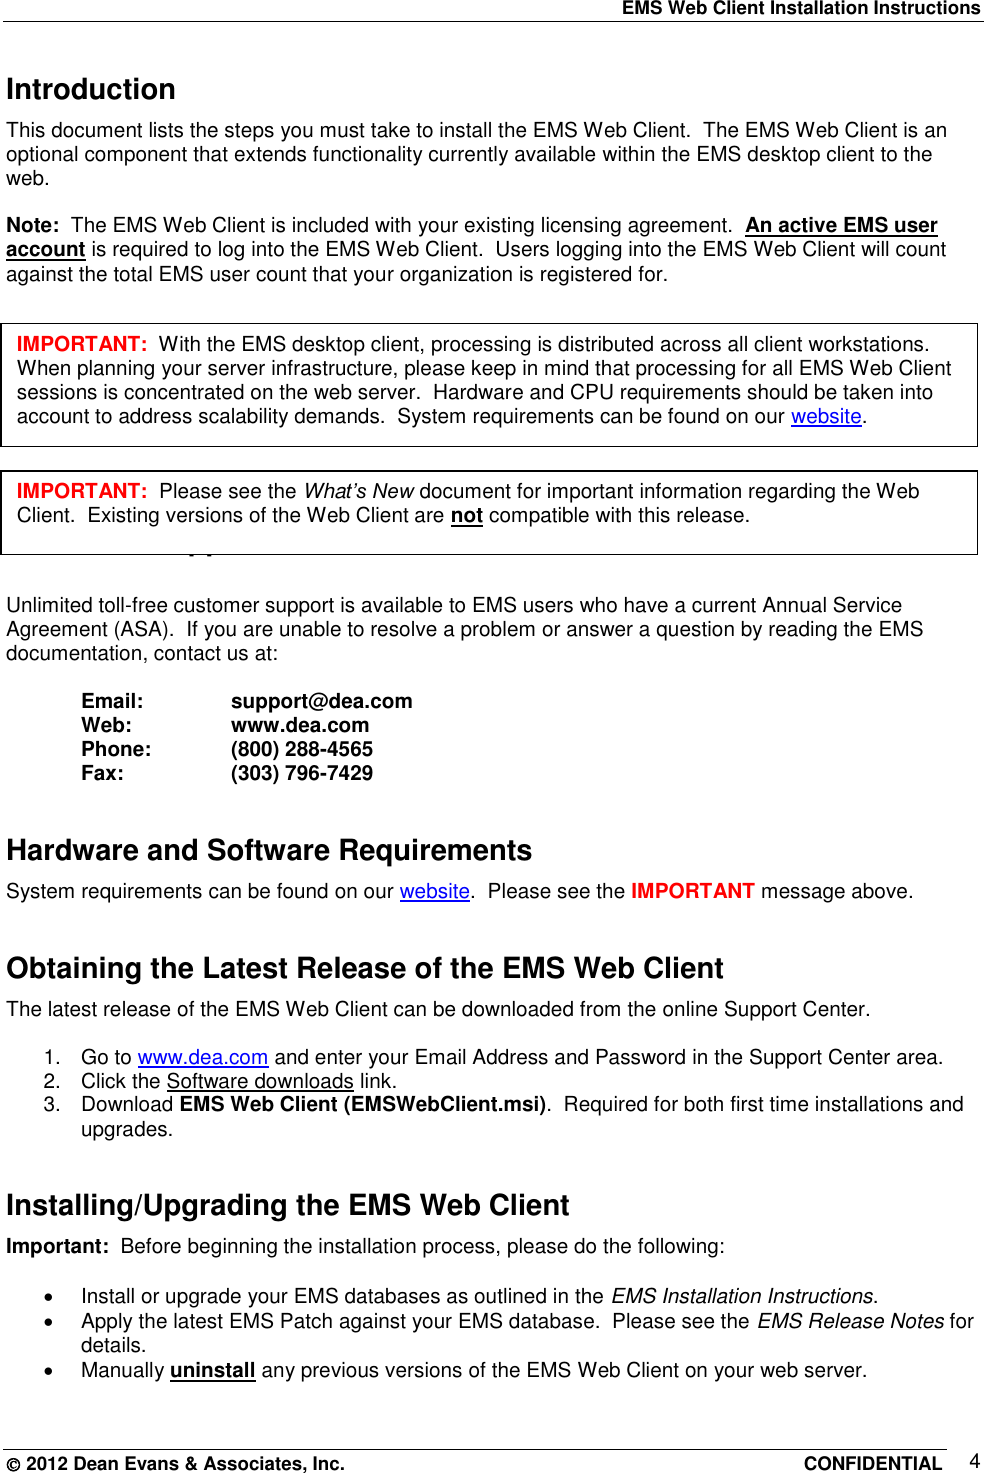 Page 4 of 7 - EMS Web Client Installation Instructions Guide